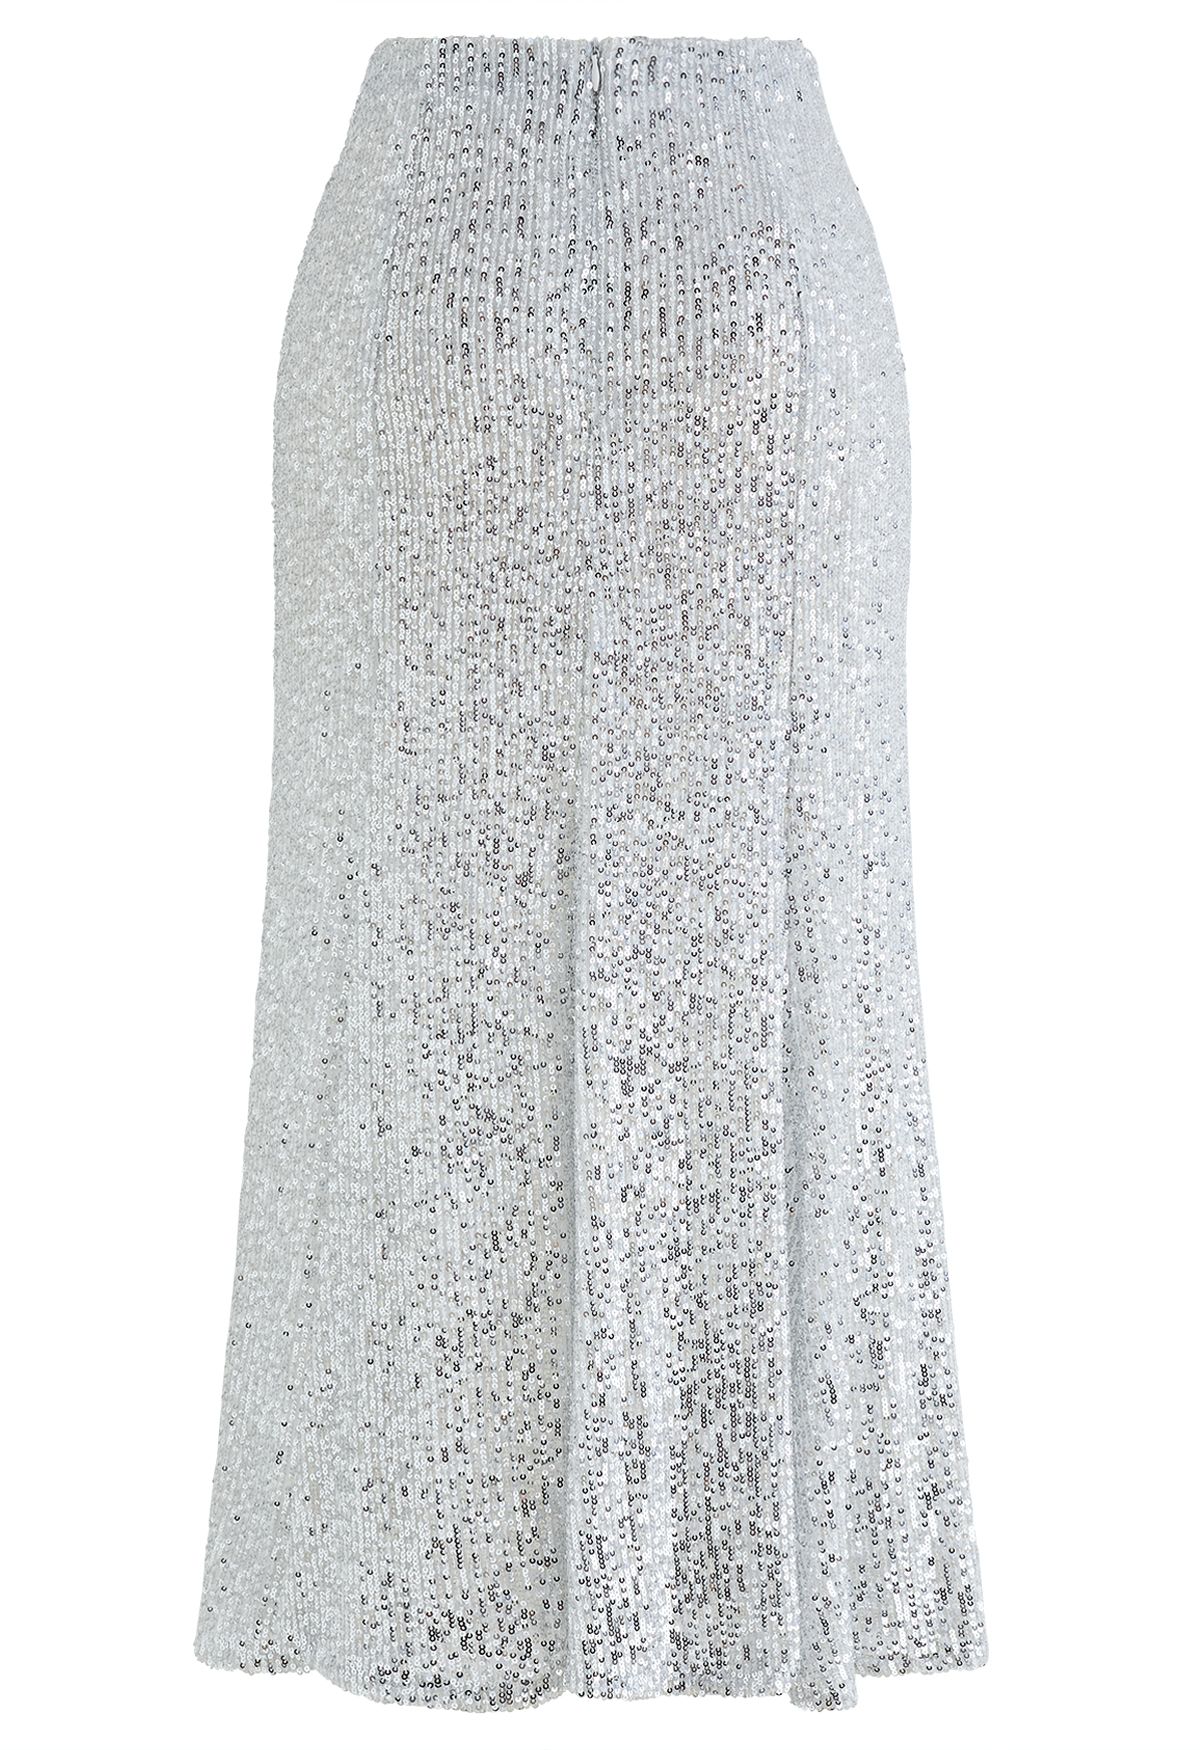 Glitter Sequins Trim Mermaid Midi Skirt in Silver - Retro, Indie and ...